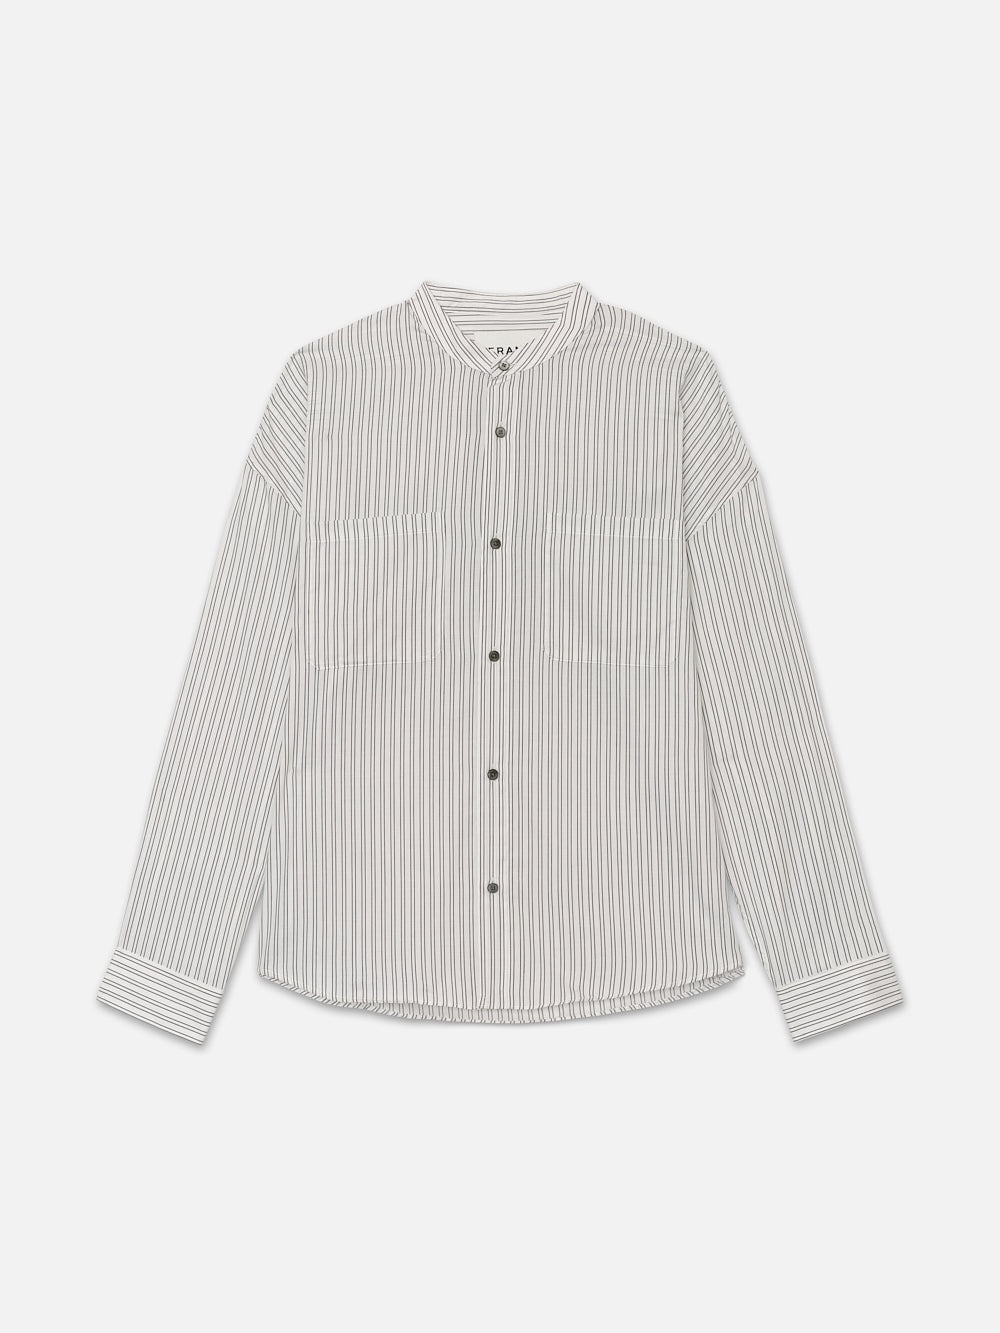 Relaxed Striped Shirt in Black White Stripe - 1